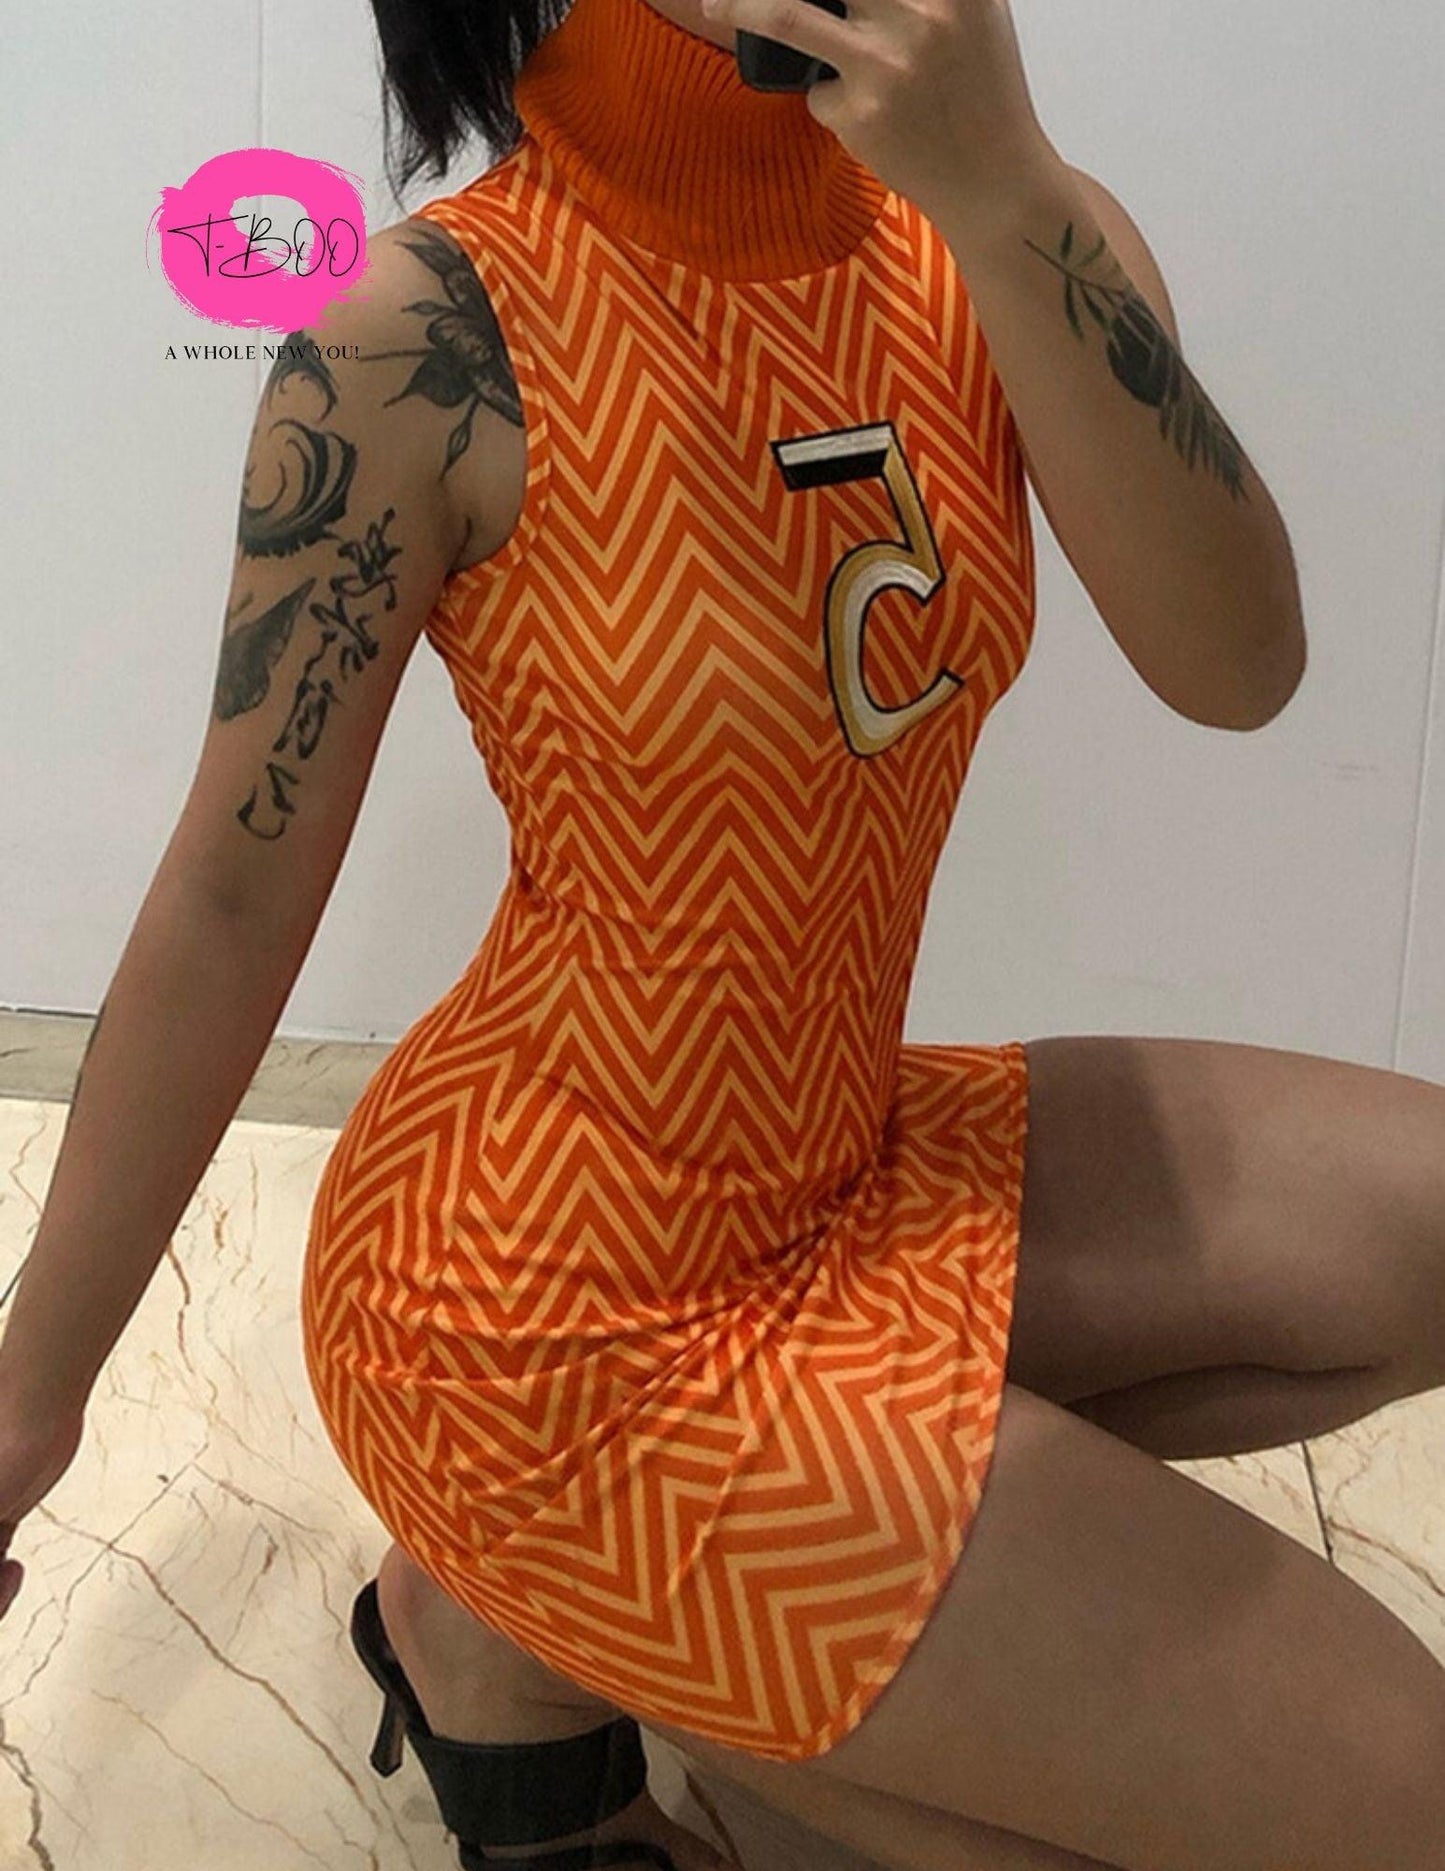 T-BOO New Sleeveless Mini Bodycon Striped Print Number Print Dress Casual Clubwear Embroidery Women Hipster Turtleneck Stretchy